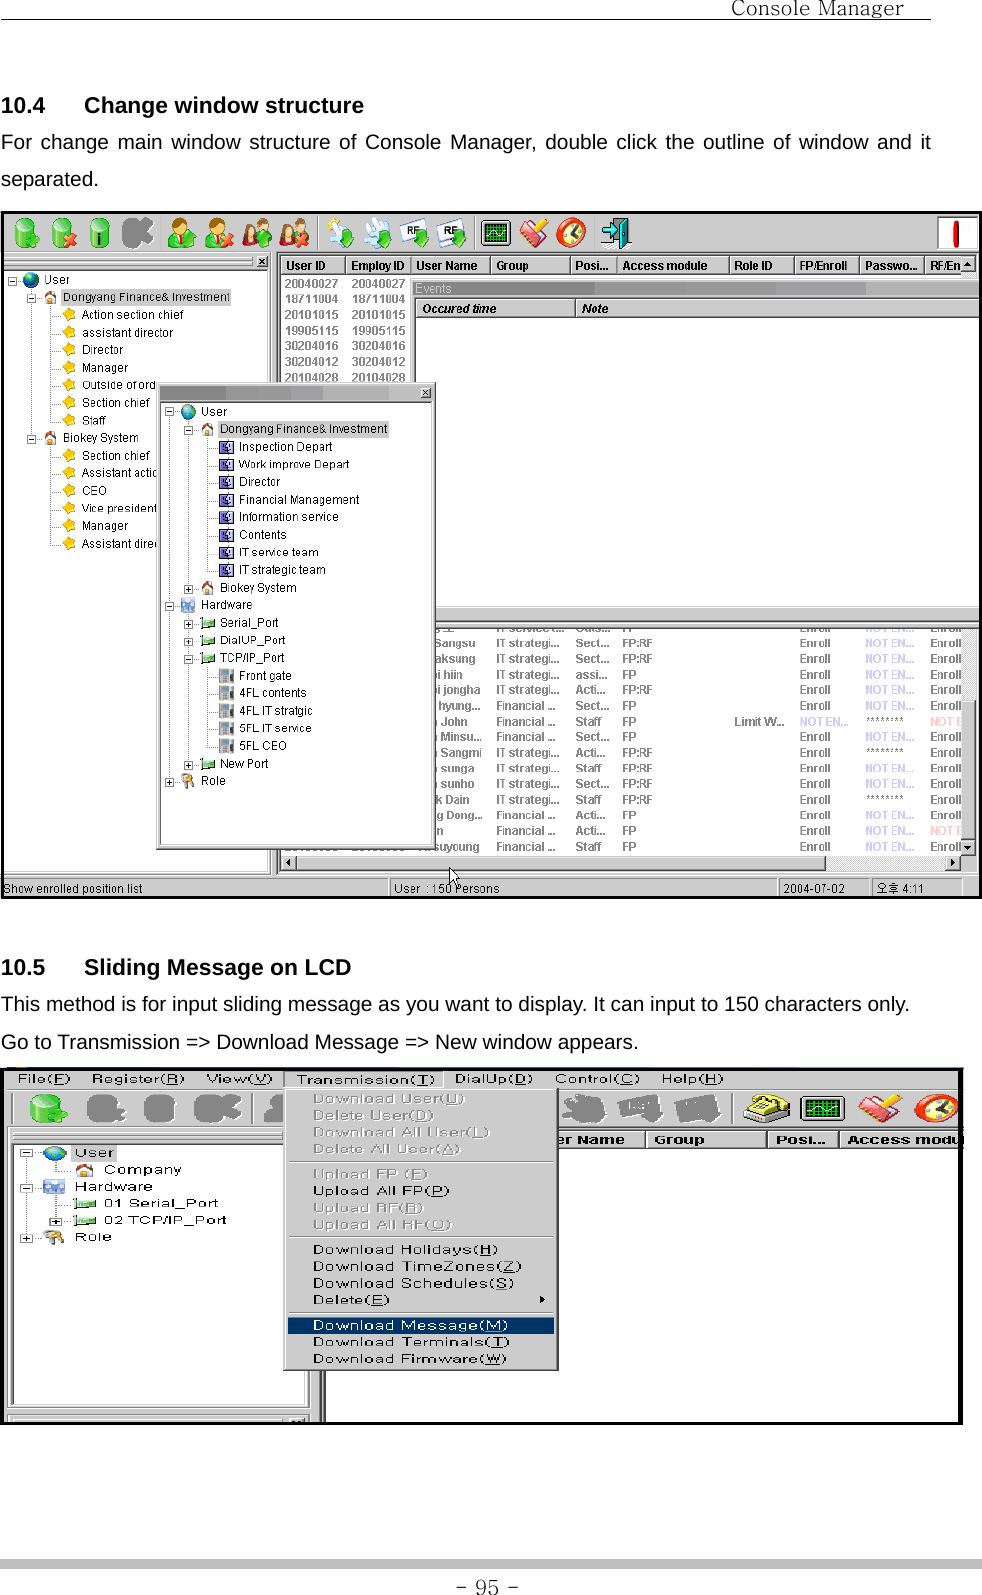                                Console Manager               - 95 -10.4  Change window structure For change main window structure of Console Manager, double click the outline of window and it separated.    10.5  Sliding Message on LCD This method is for input sliding message as you want to display. It can input to 150 characters only.   Go to Transmission =&gt; Download Message =&gt; New window appears.  